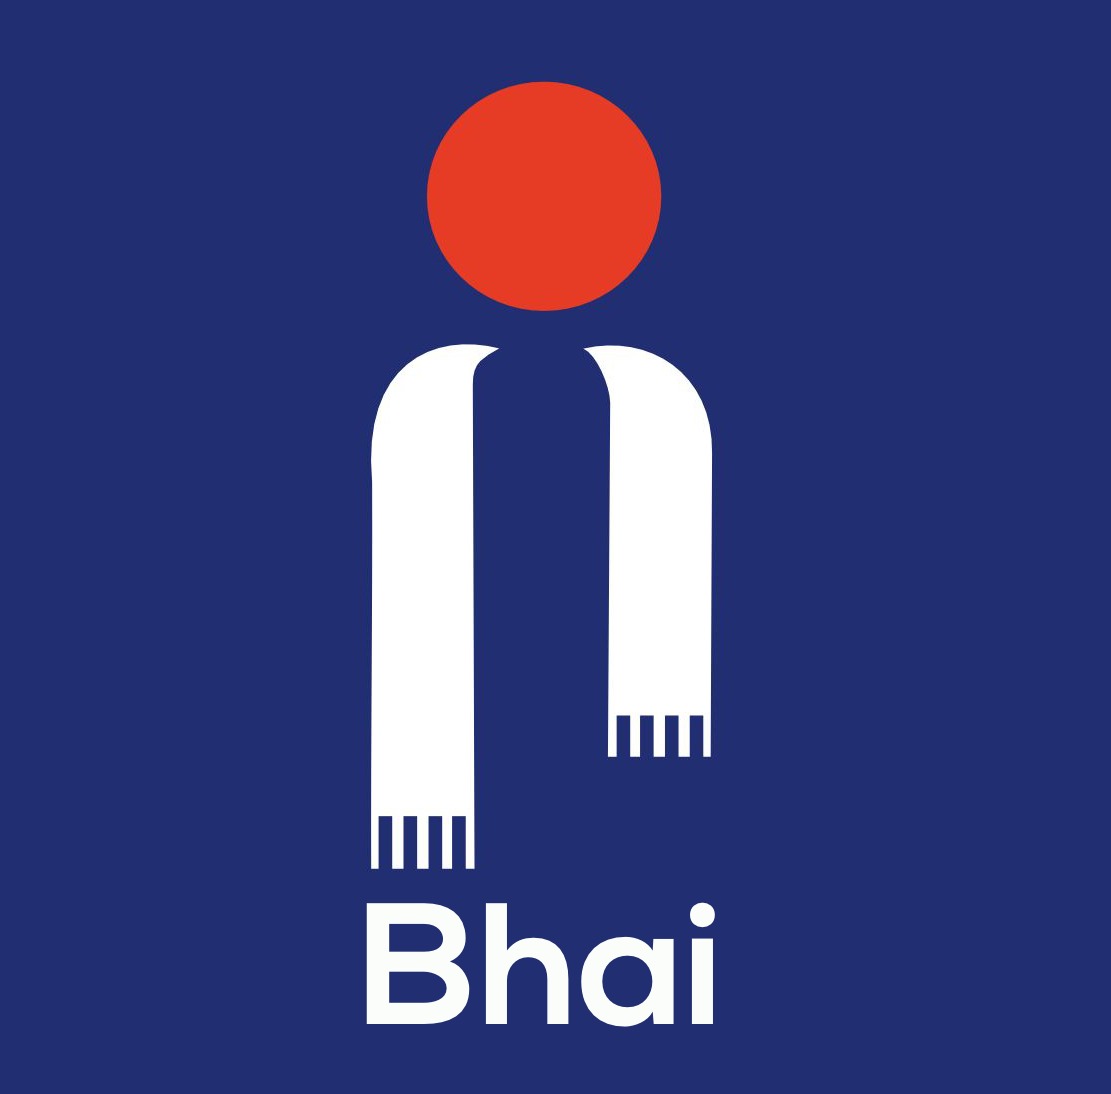 Along with photos, videos, news and press notes will also be available on 'Bhai' app.